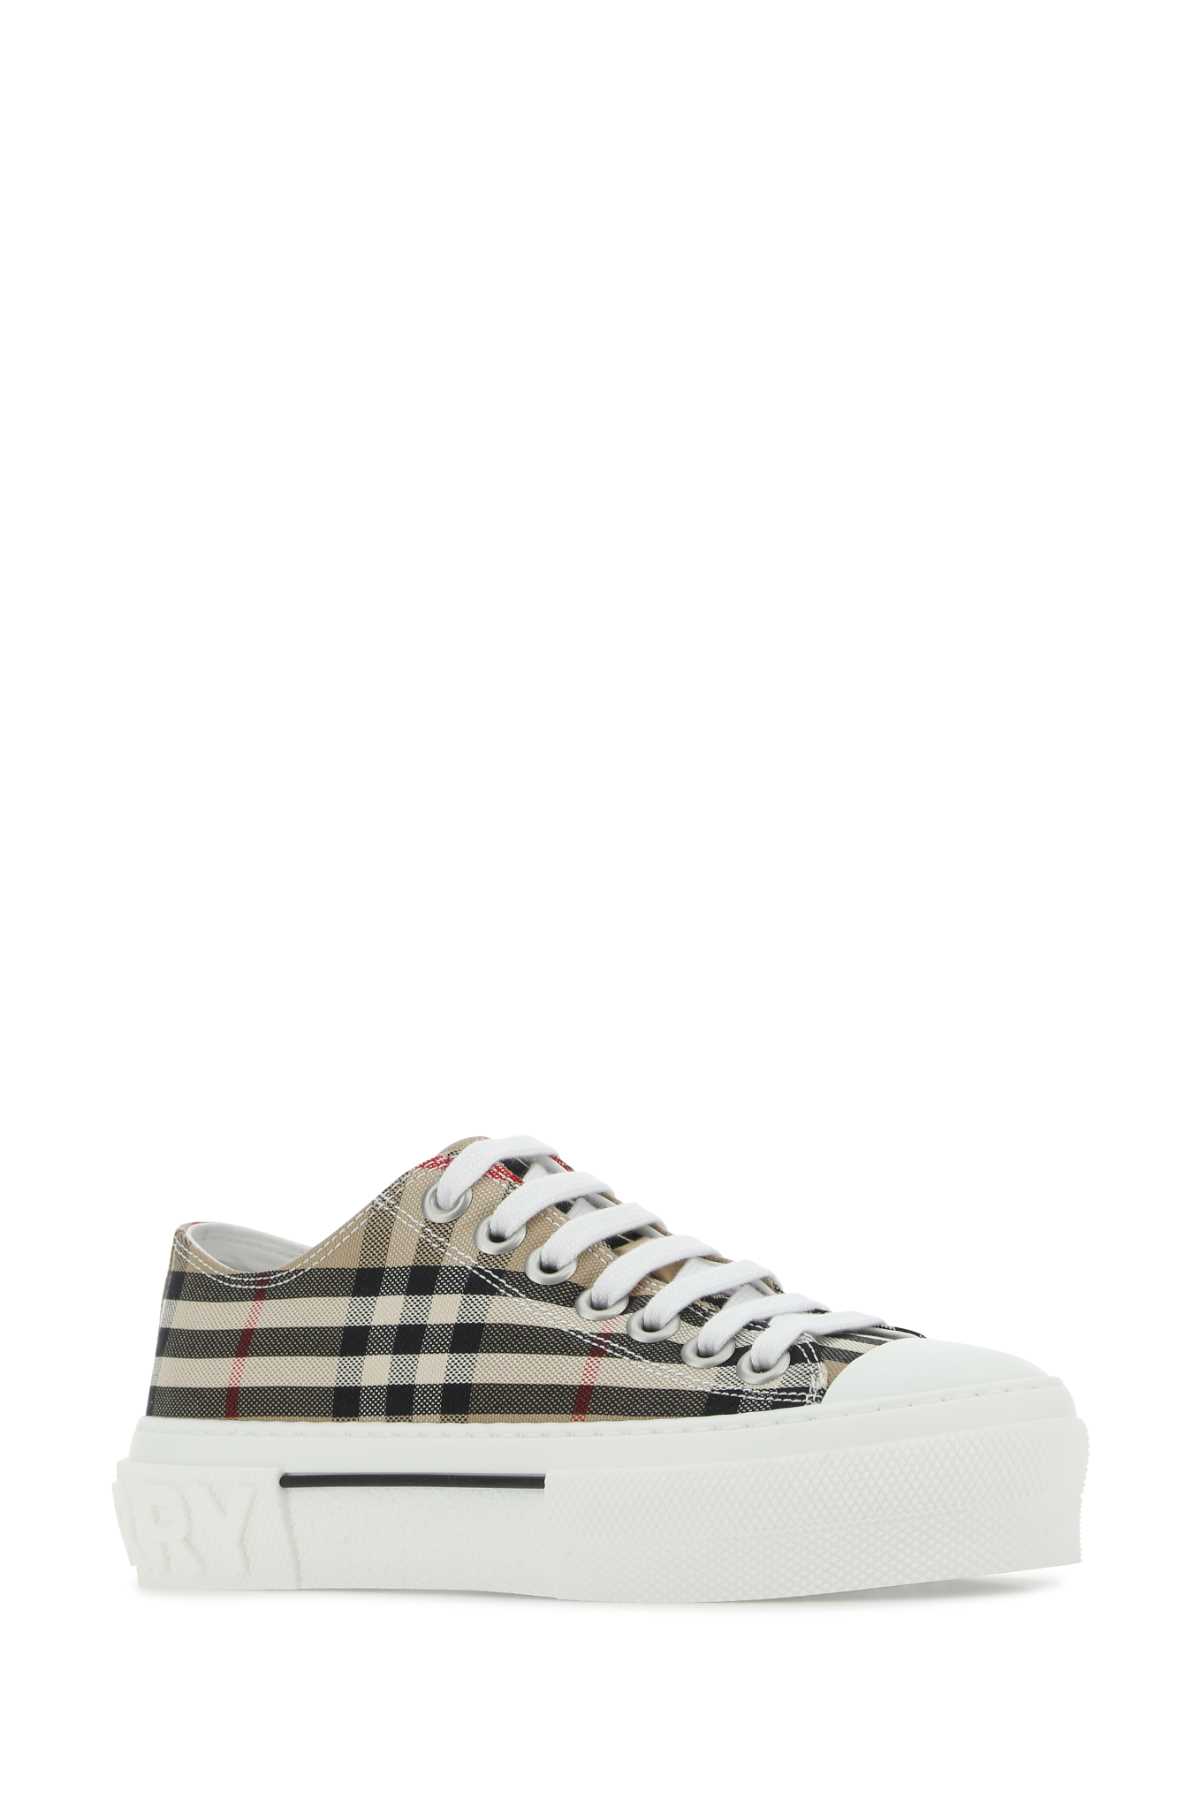 Shop Burberry Printed Canvas Sneakers In A7028